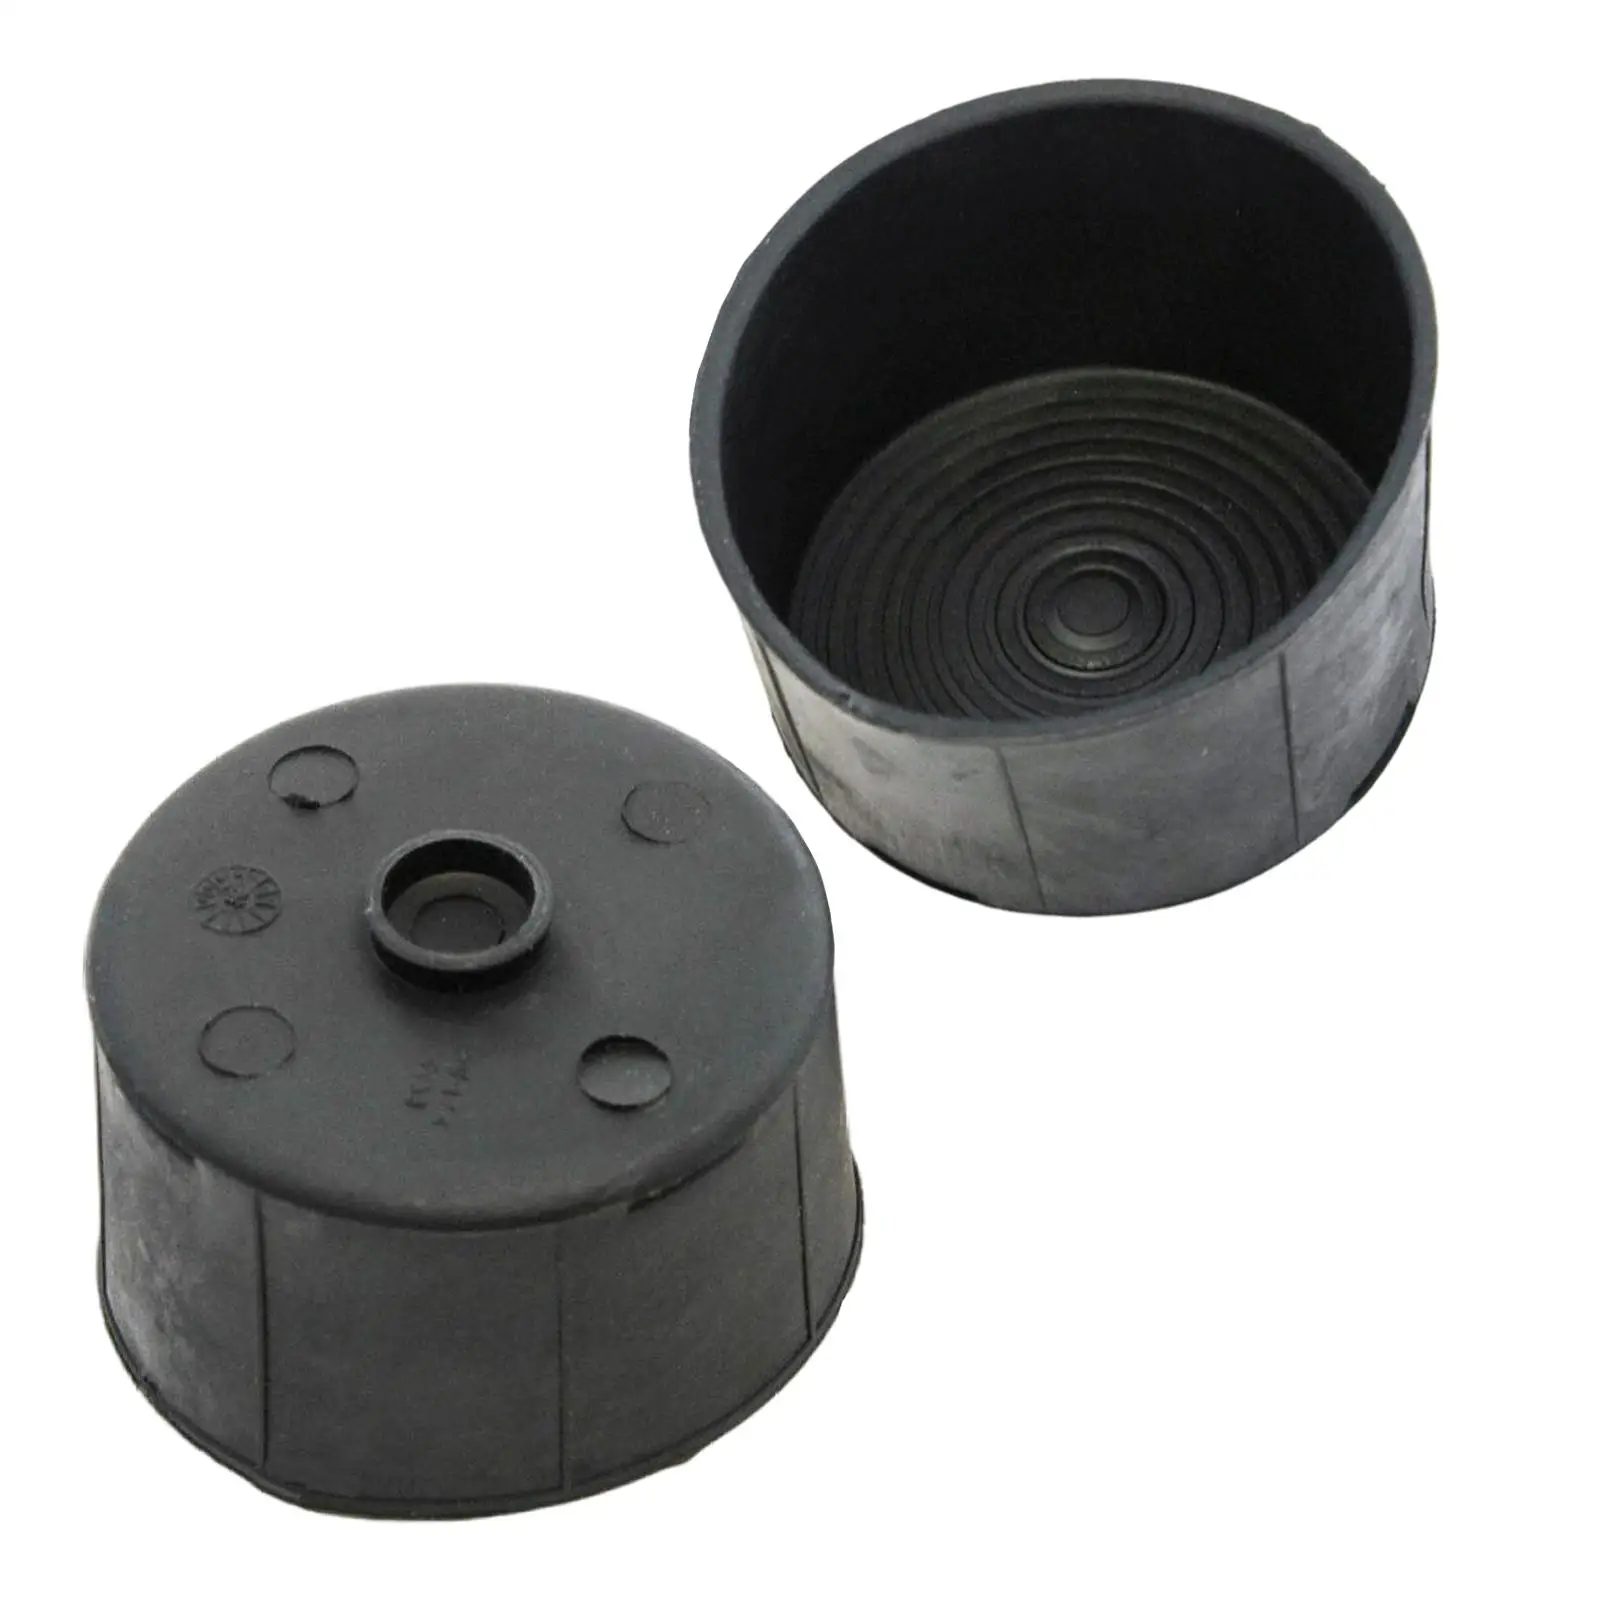  Automobile Cup Holder Insert 1EB17DX9Ab 1EB17DX9 Fit for RAM 1500 2500 3500 High  Wearproof Repair